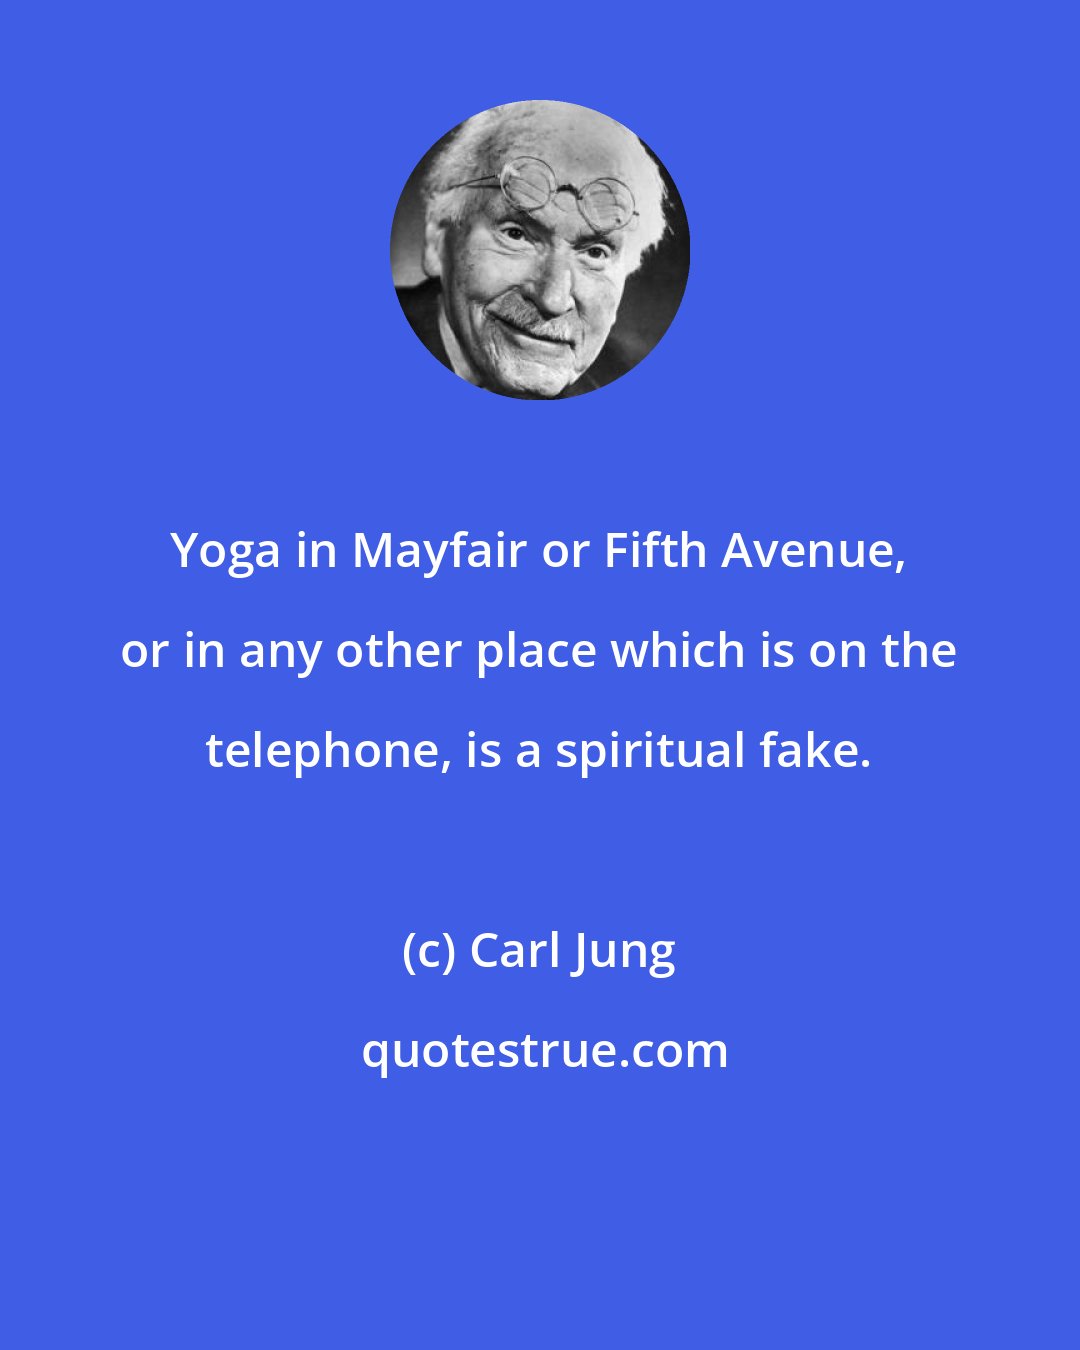 Carl Jung: Yoga in Mayfair or Fifth Avenue, or in any other place which is on the telephone, is a spiritual fake.